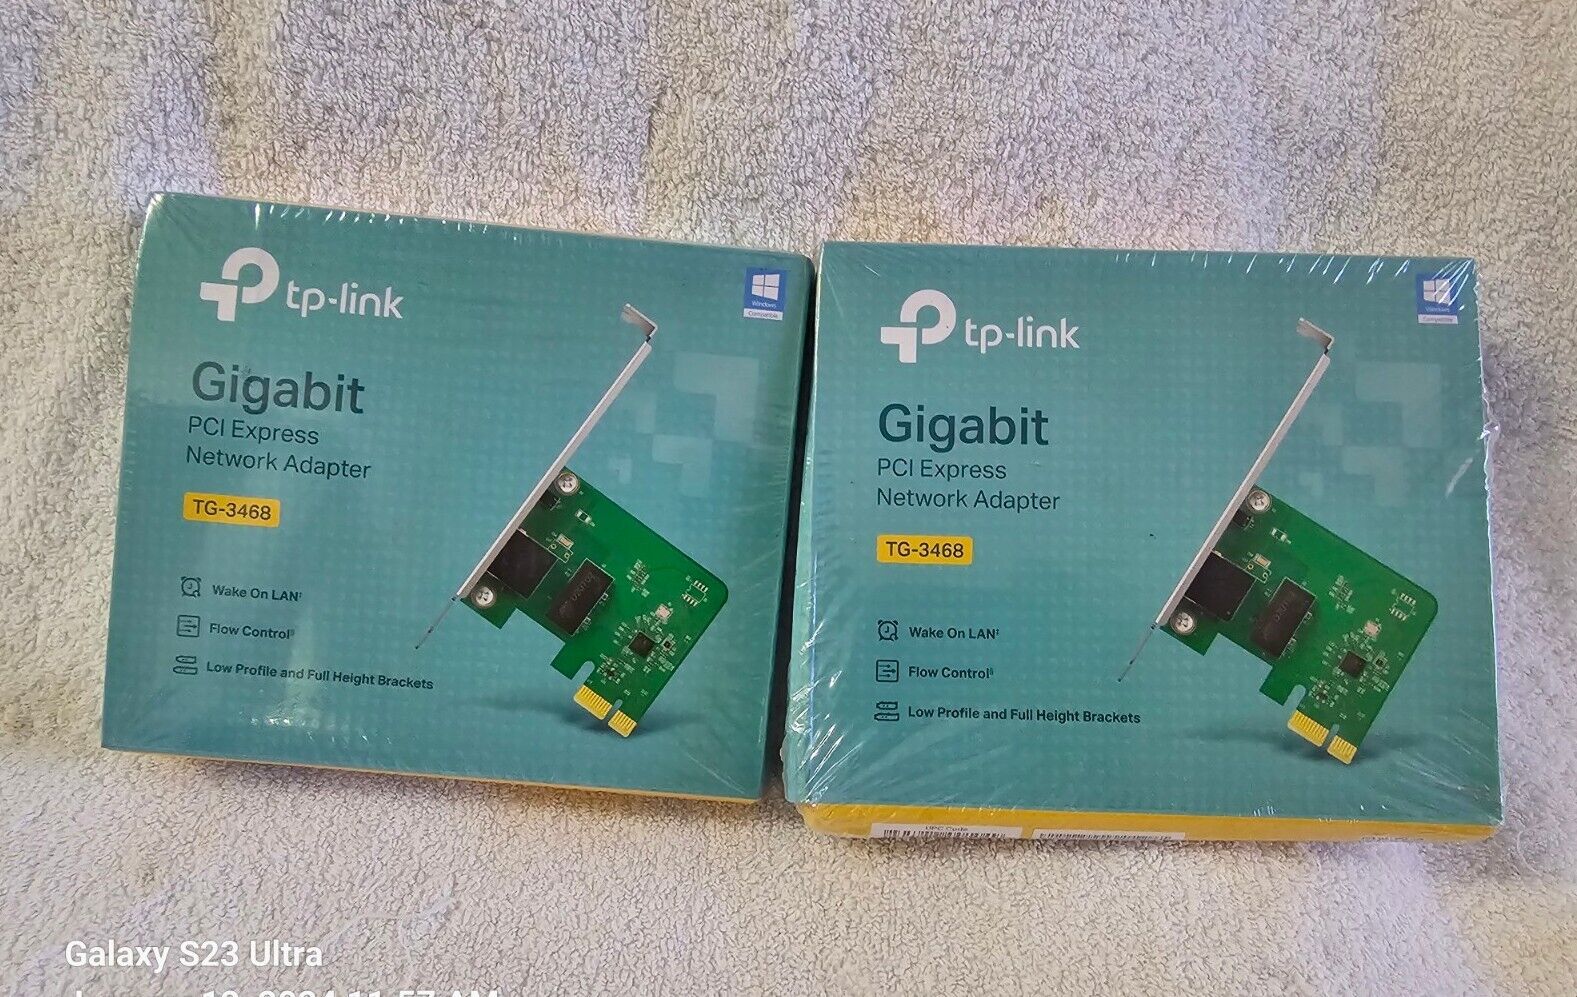 (2) TP-Link TG-3468 Gigabit PCI Express Network Adapters (NEW)